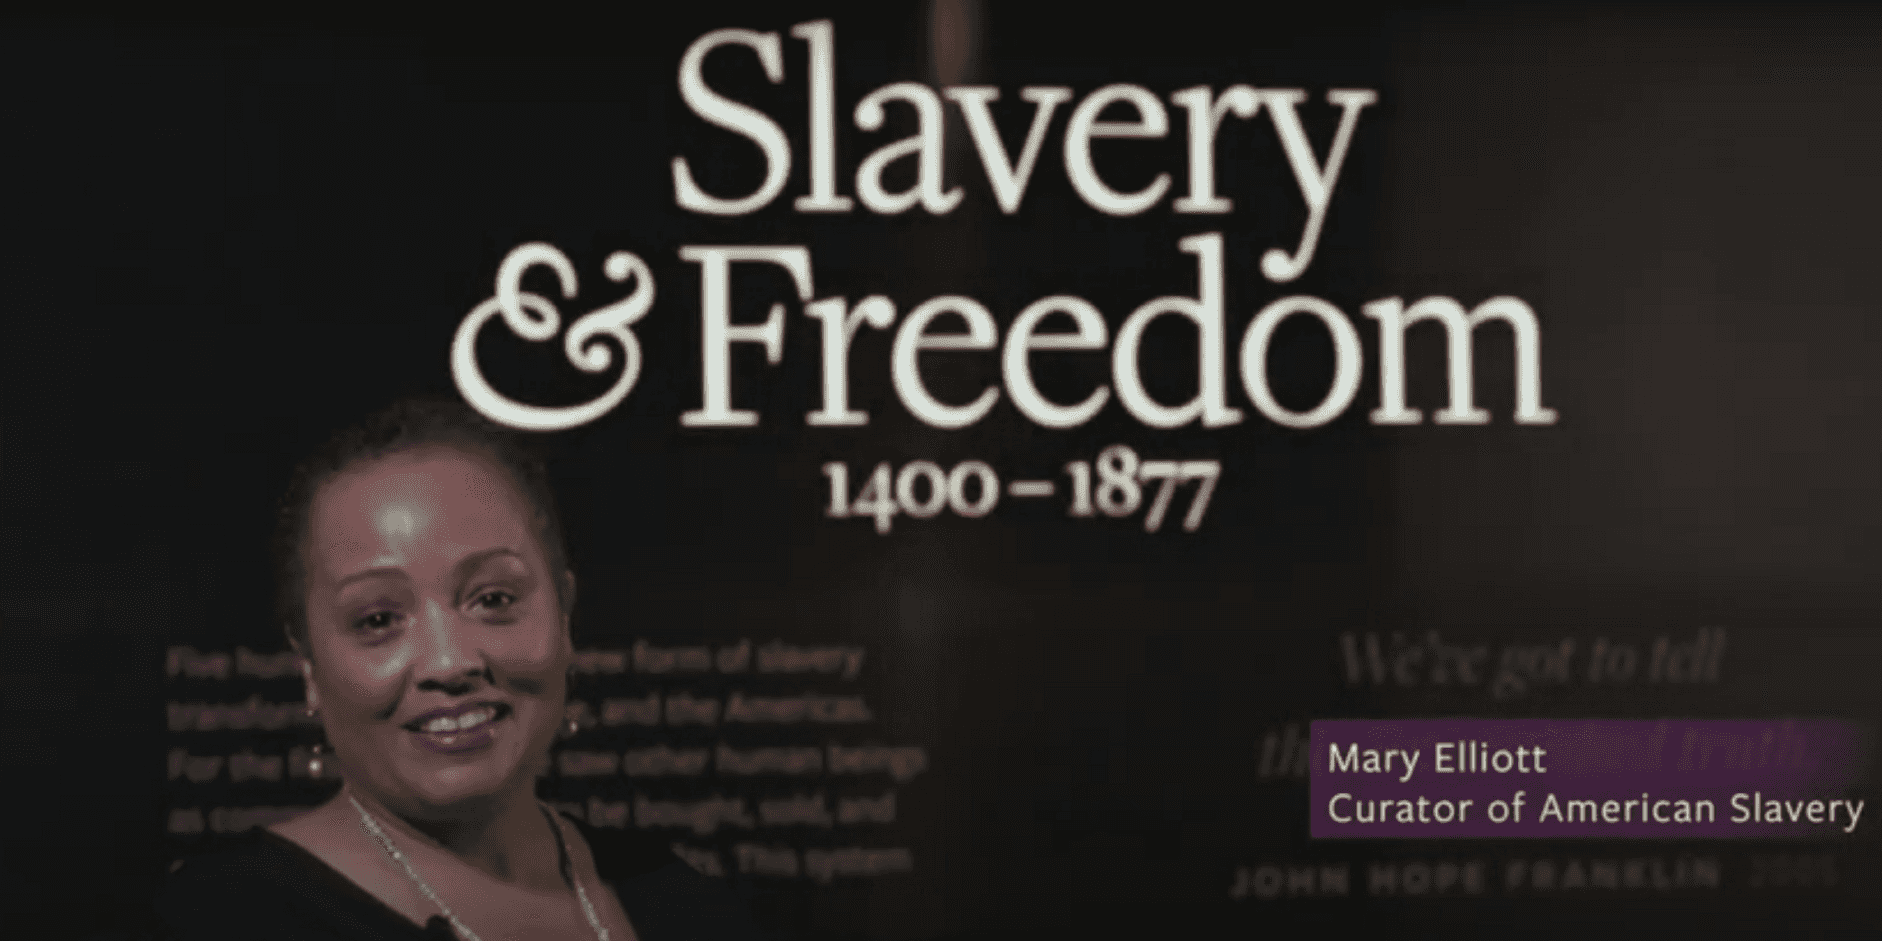 Introductory video for Slavery and Freedom exhibit